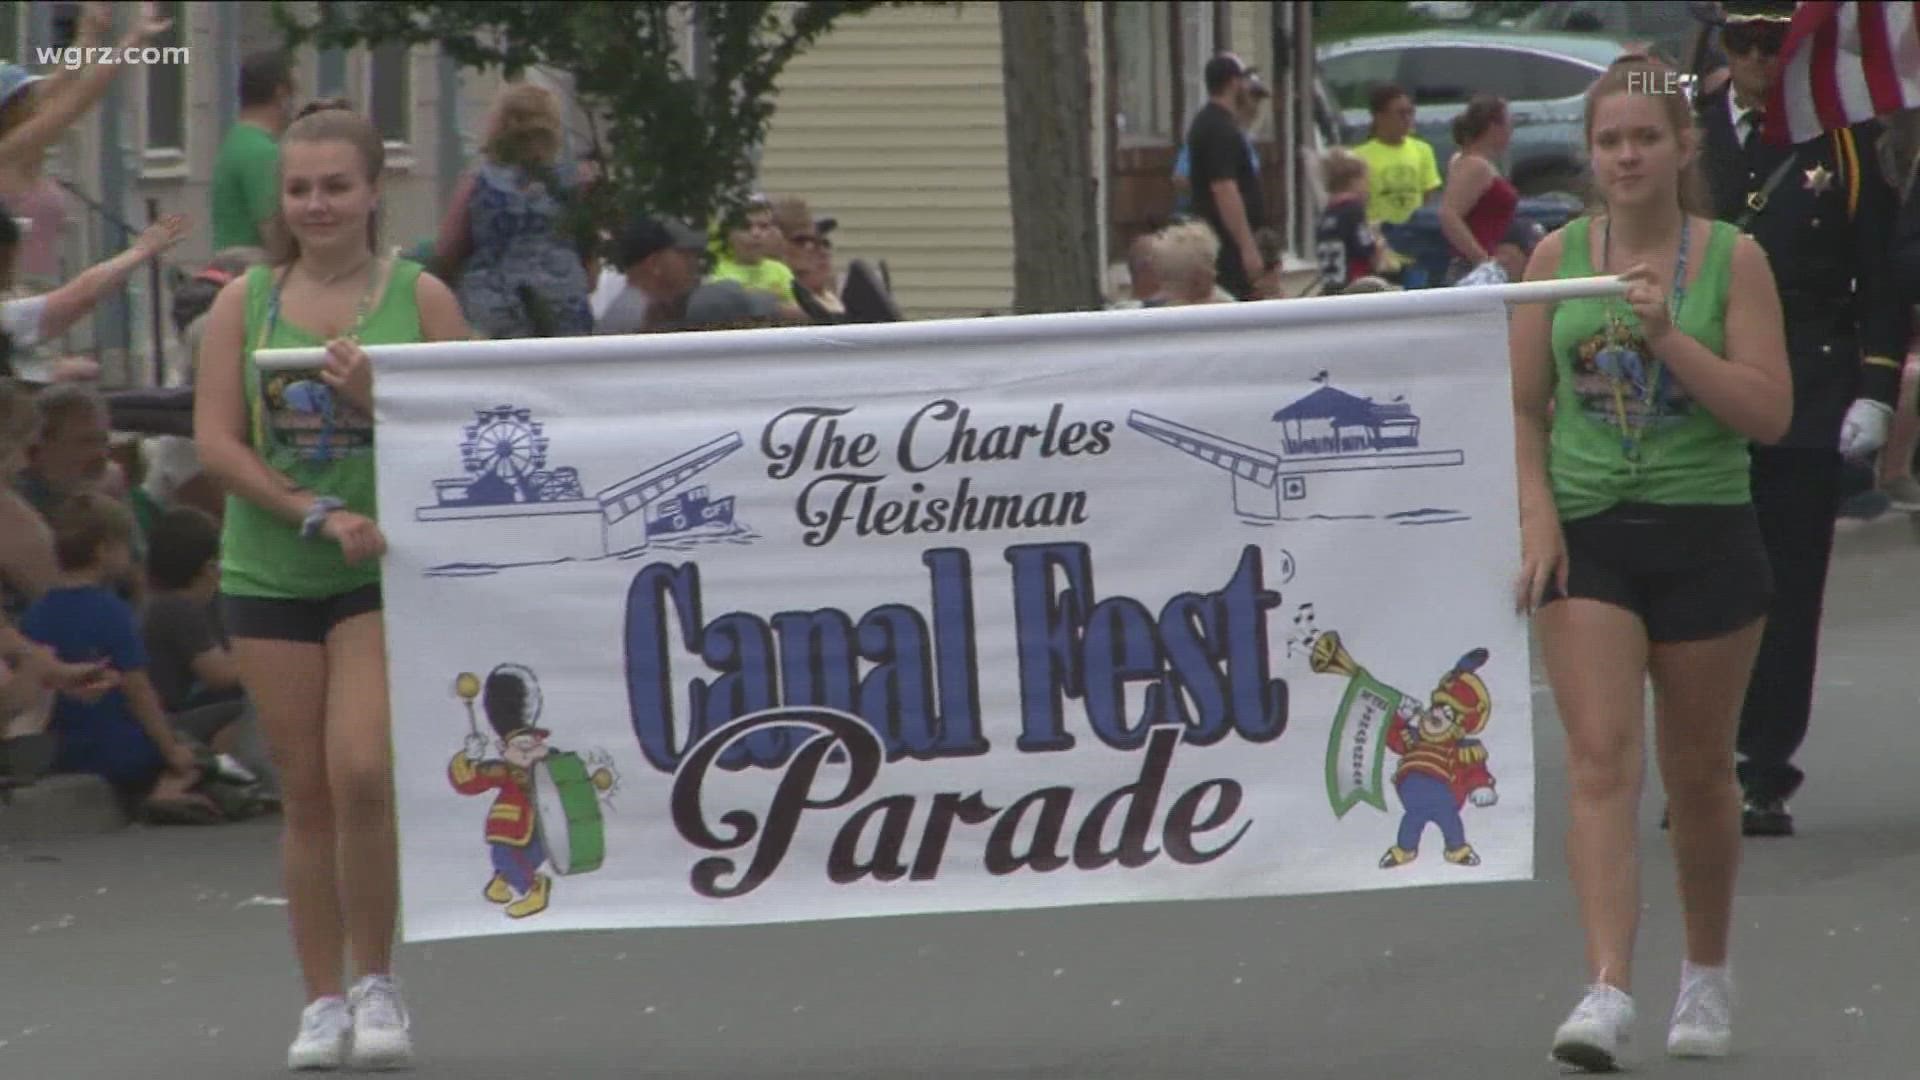 With so many festivals and events returning this summer Canal Fest of the Tonawanda's is still planned but without the community parade.